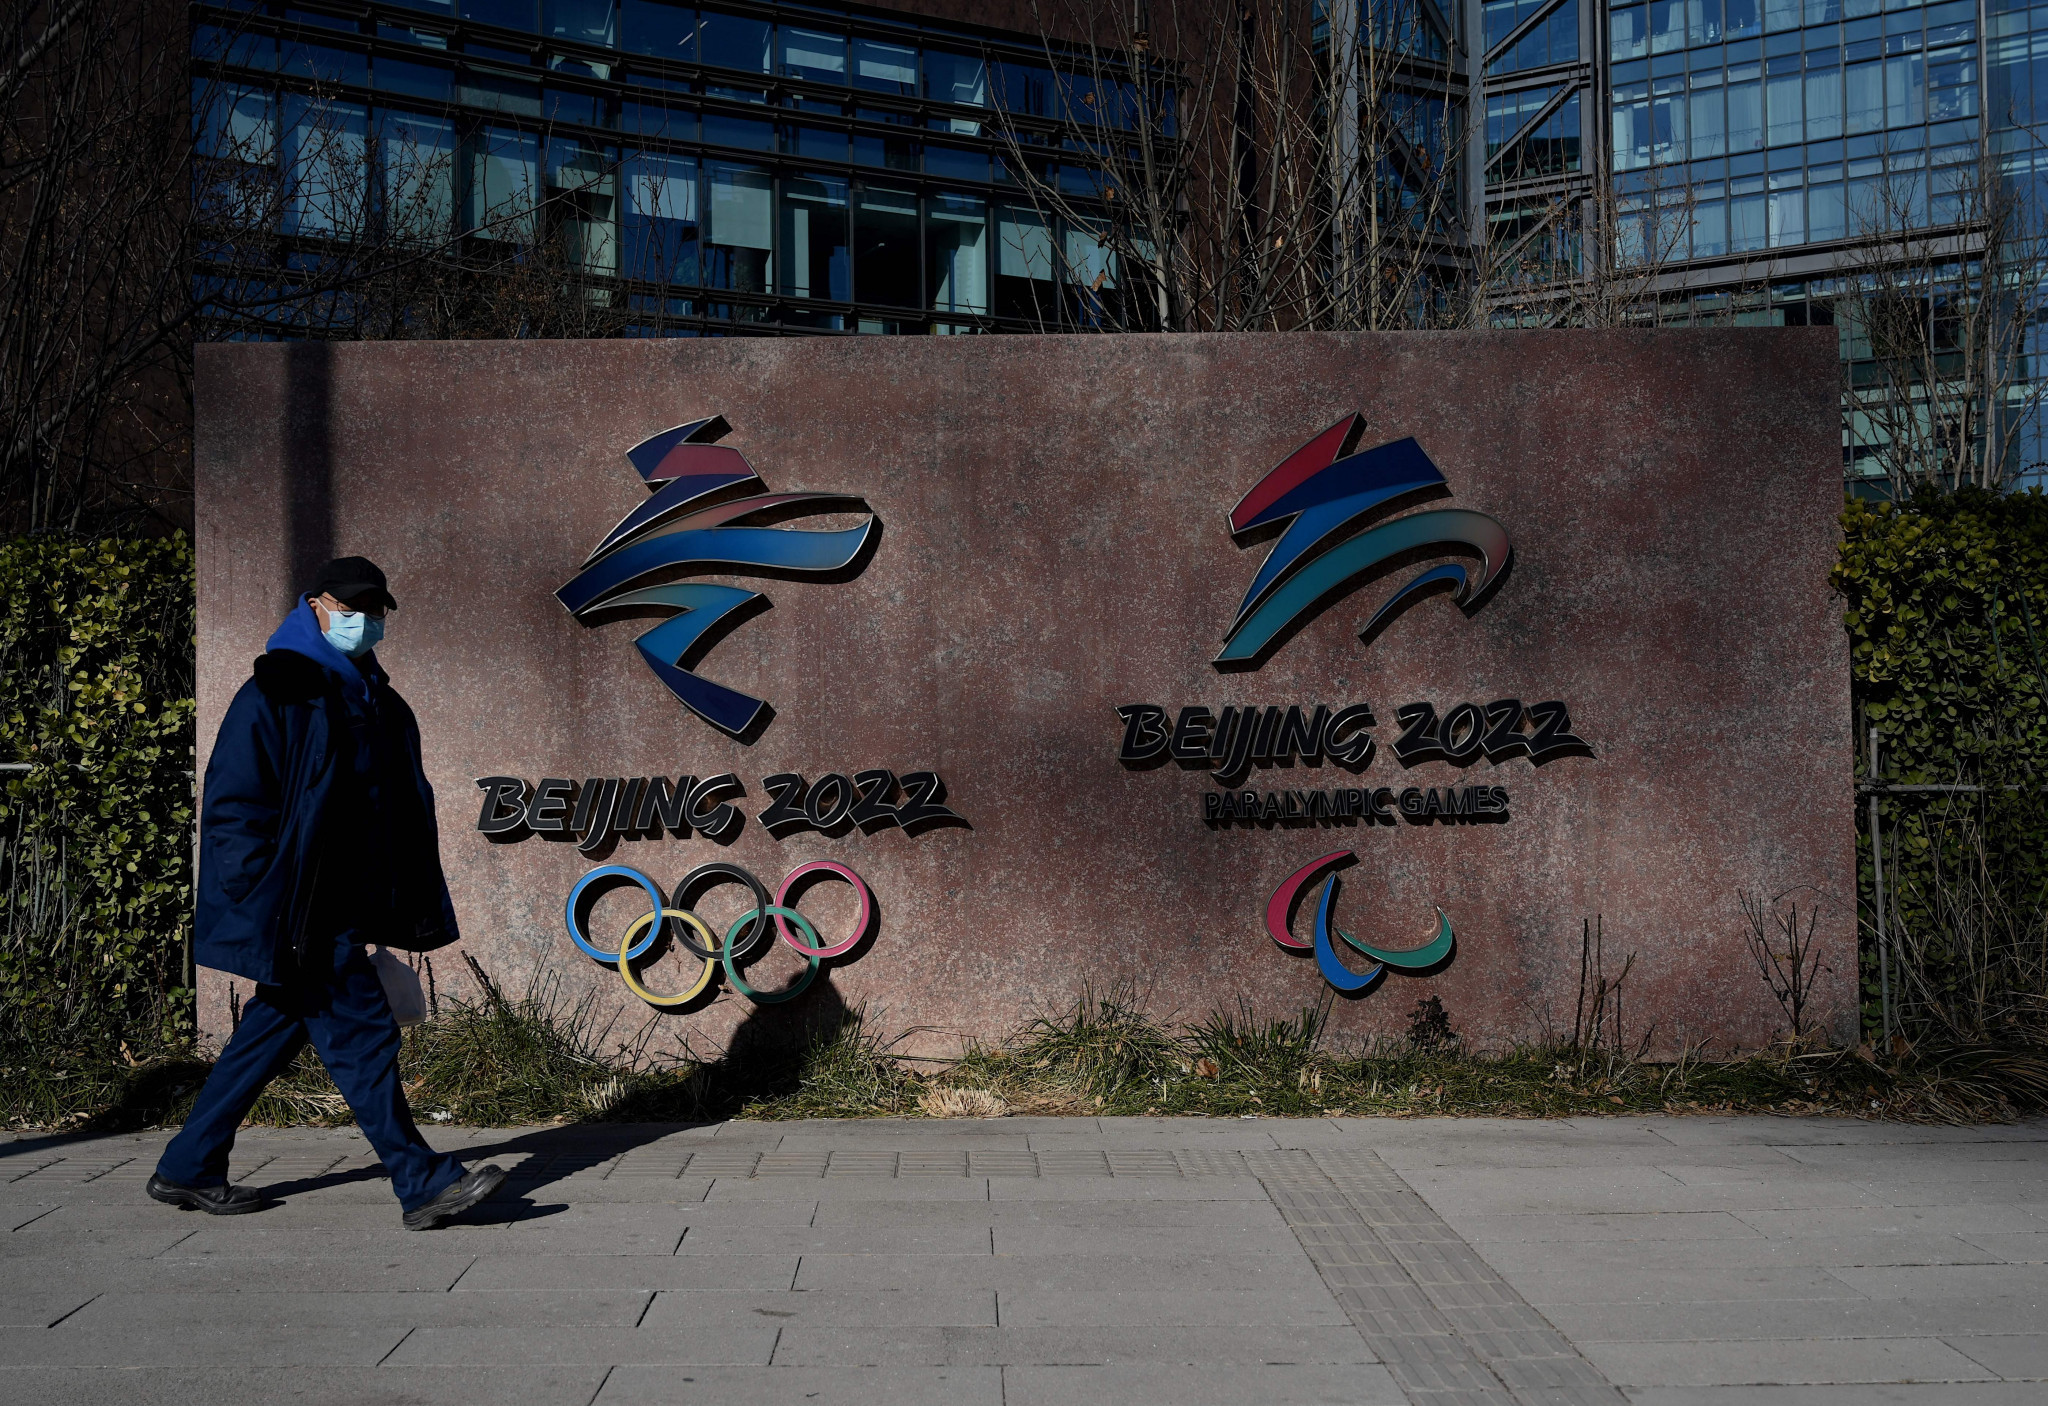 IOC insists safety of athletes guaranteed at Beijing 2022 as concern for Peng welfare persists